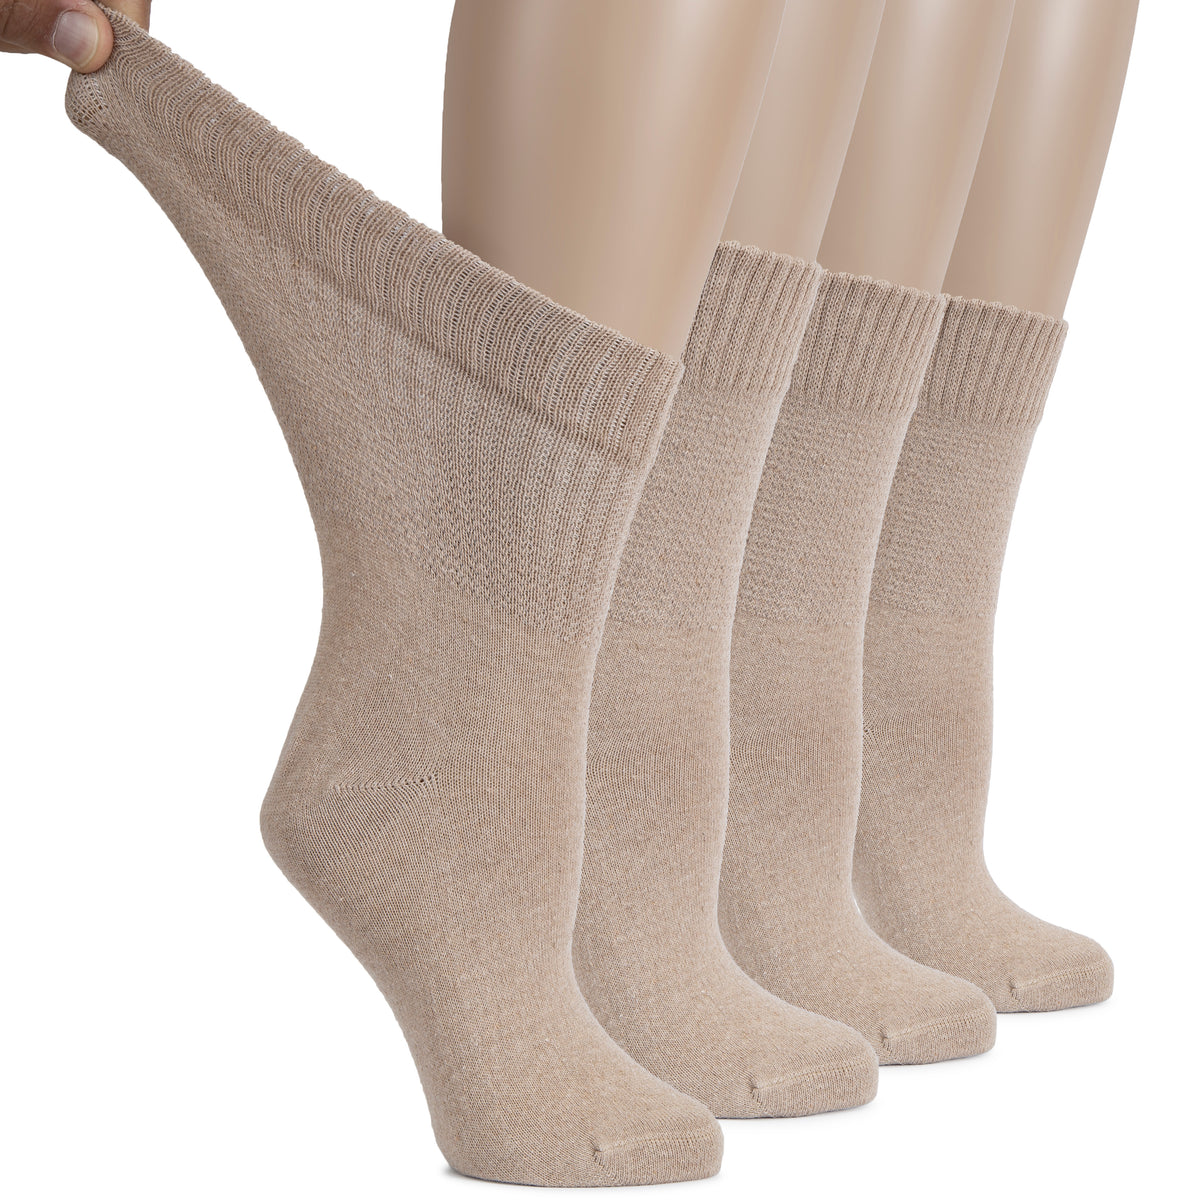 Two pairs of Women's Diabetic Cotton Crew Socks with one leg up, designed for comfort and support.